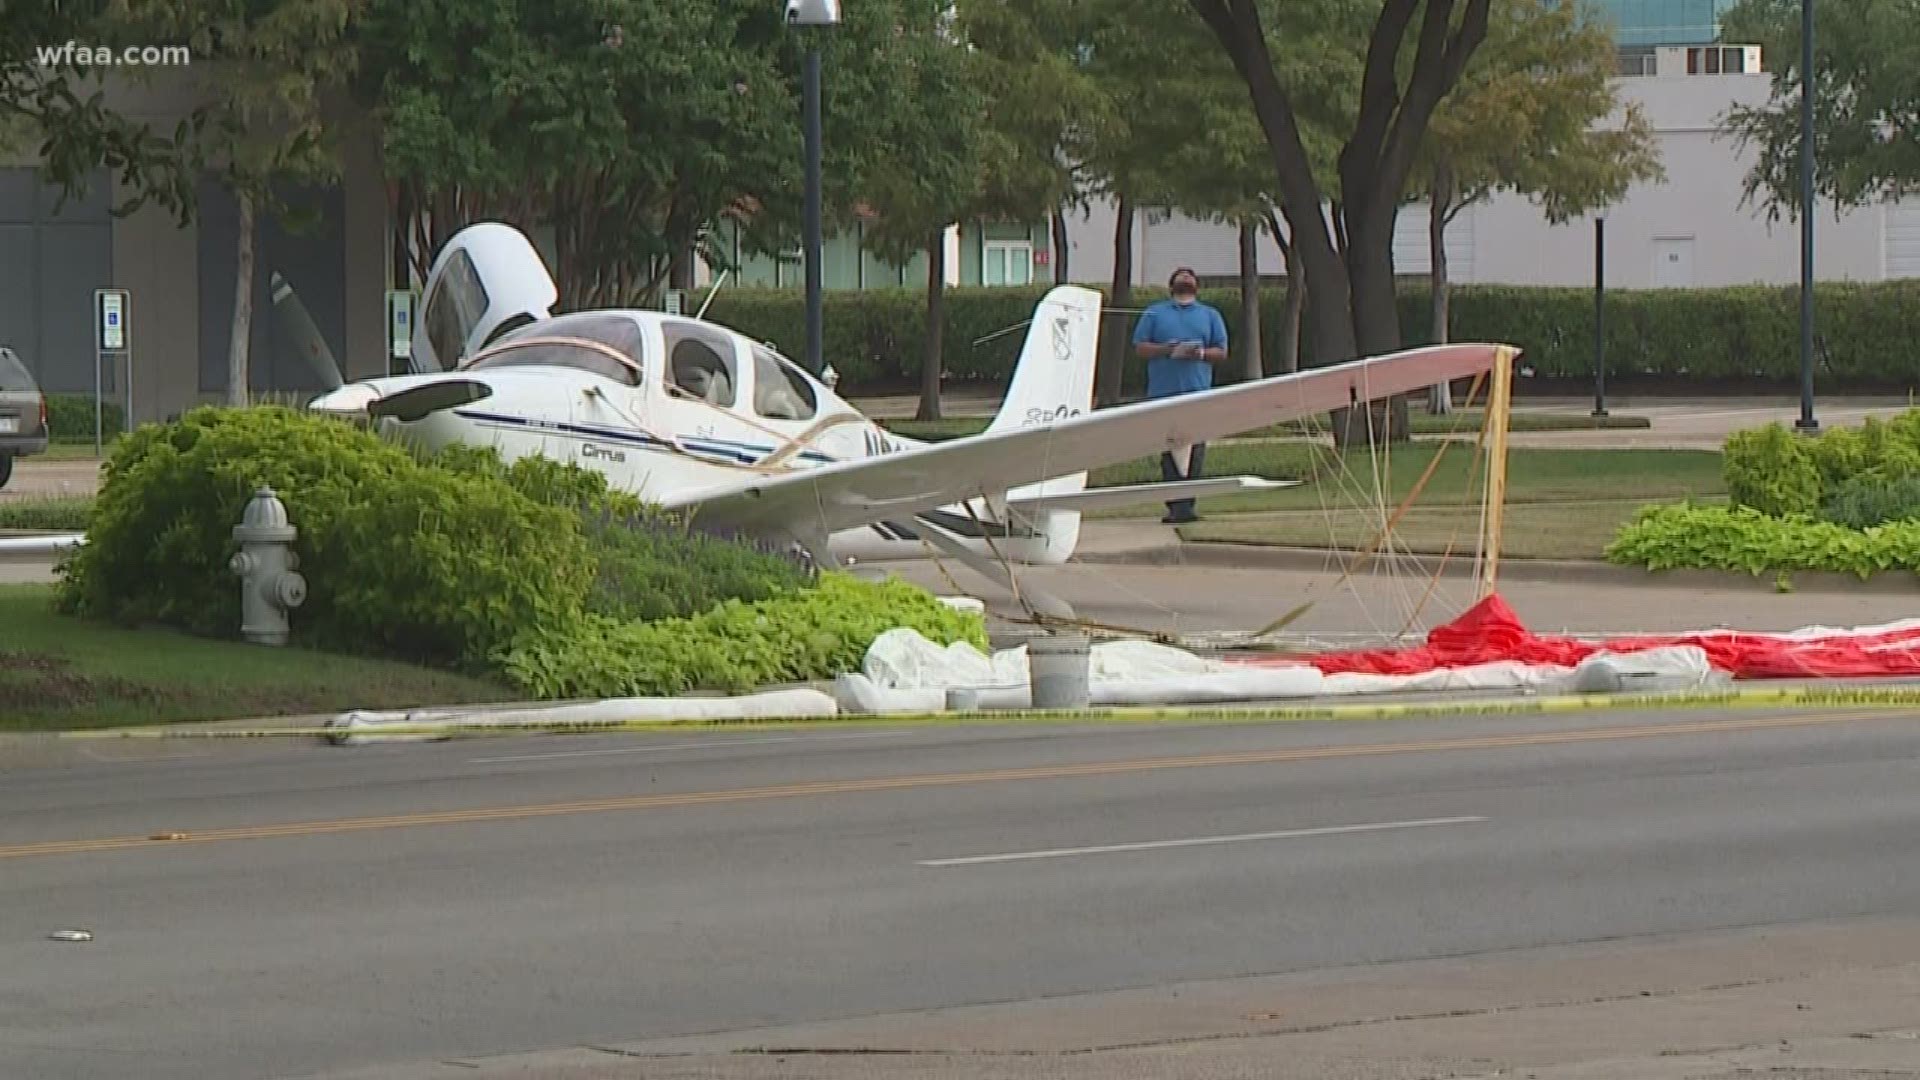 The FAA said the pilot deployed the Cirrus' emergency parachute with the plane coming to rest about a mile and a half south of the airport.